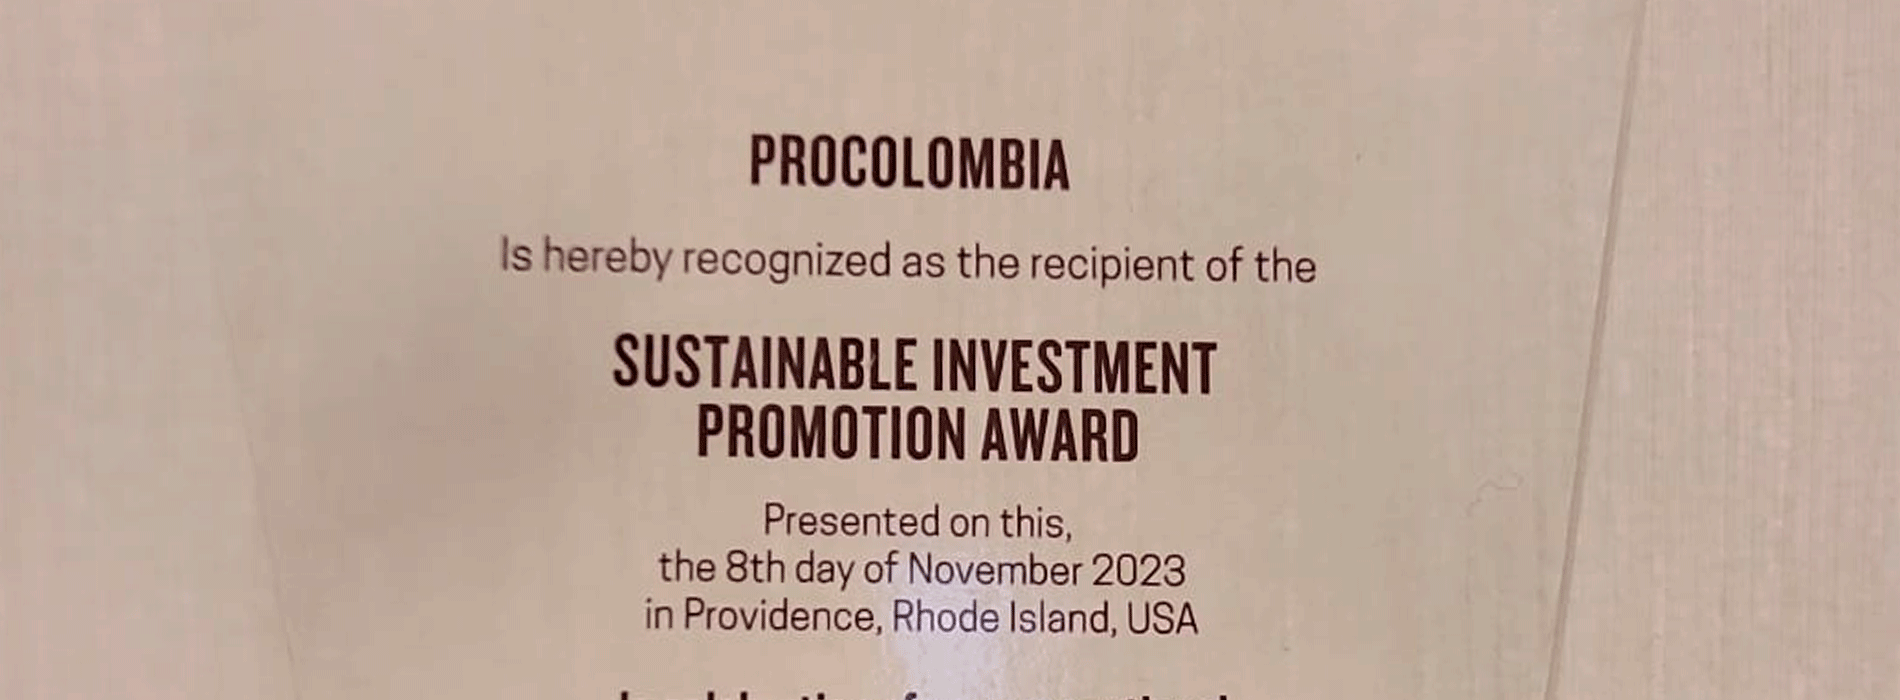 Achieves Sustainable Investment Promotion Award at the Go Global Awards 2023